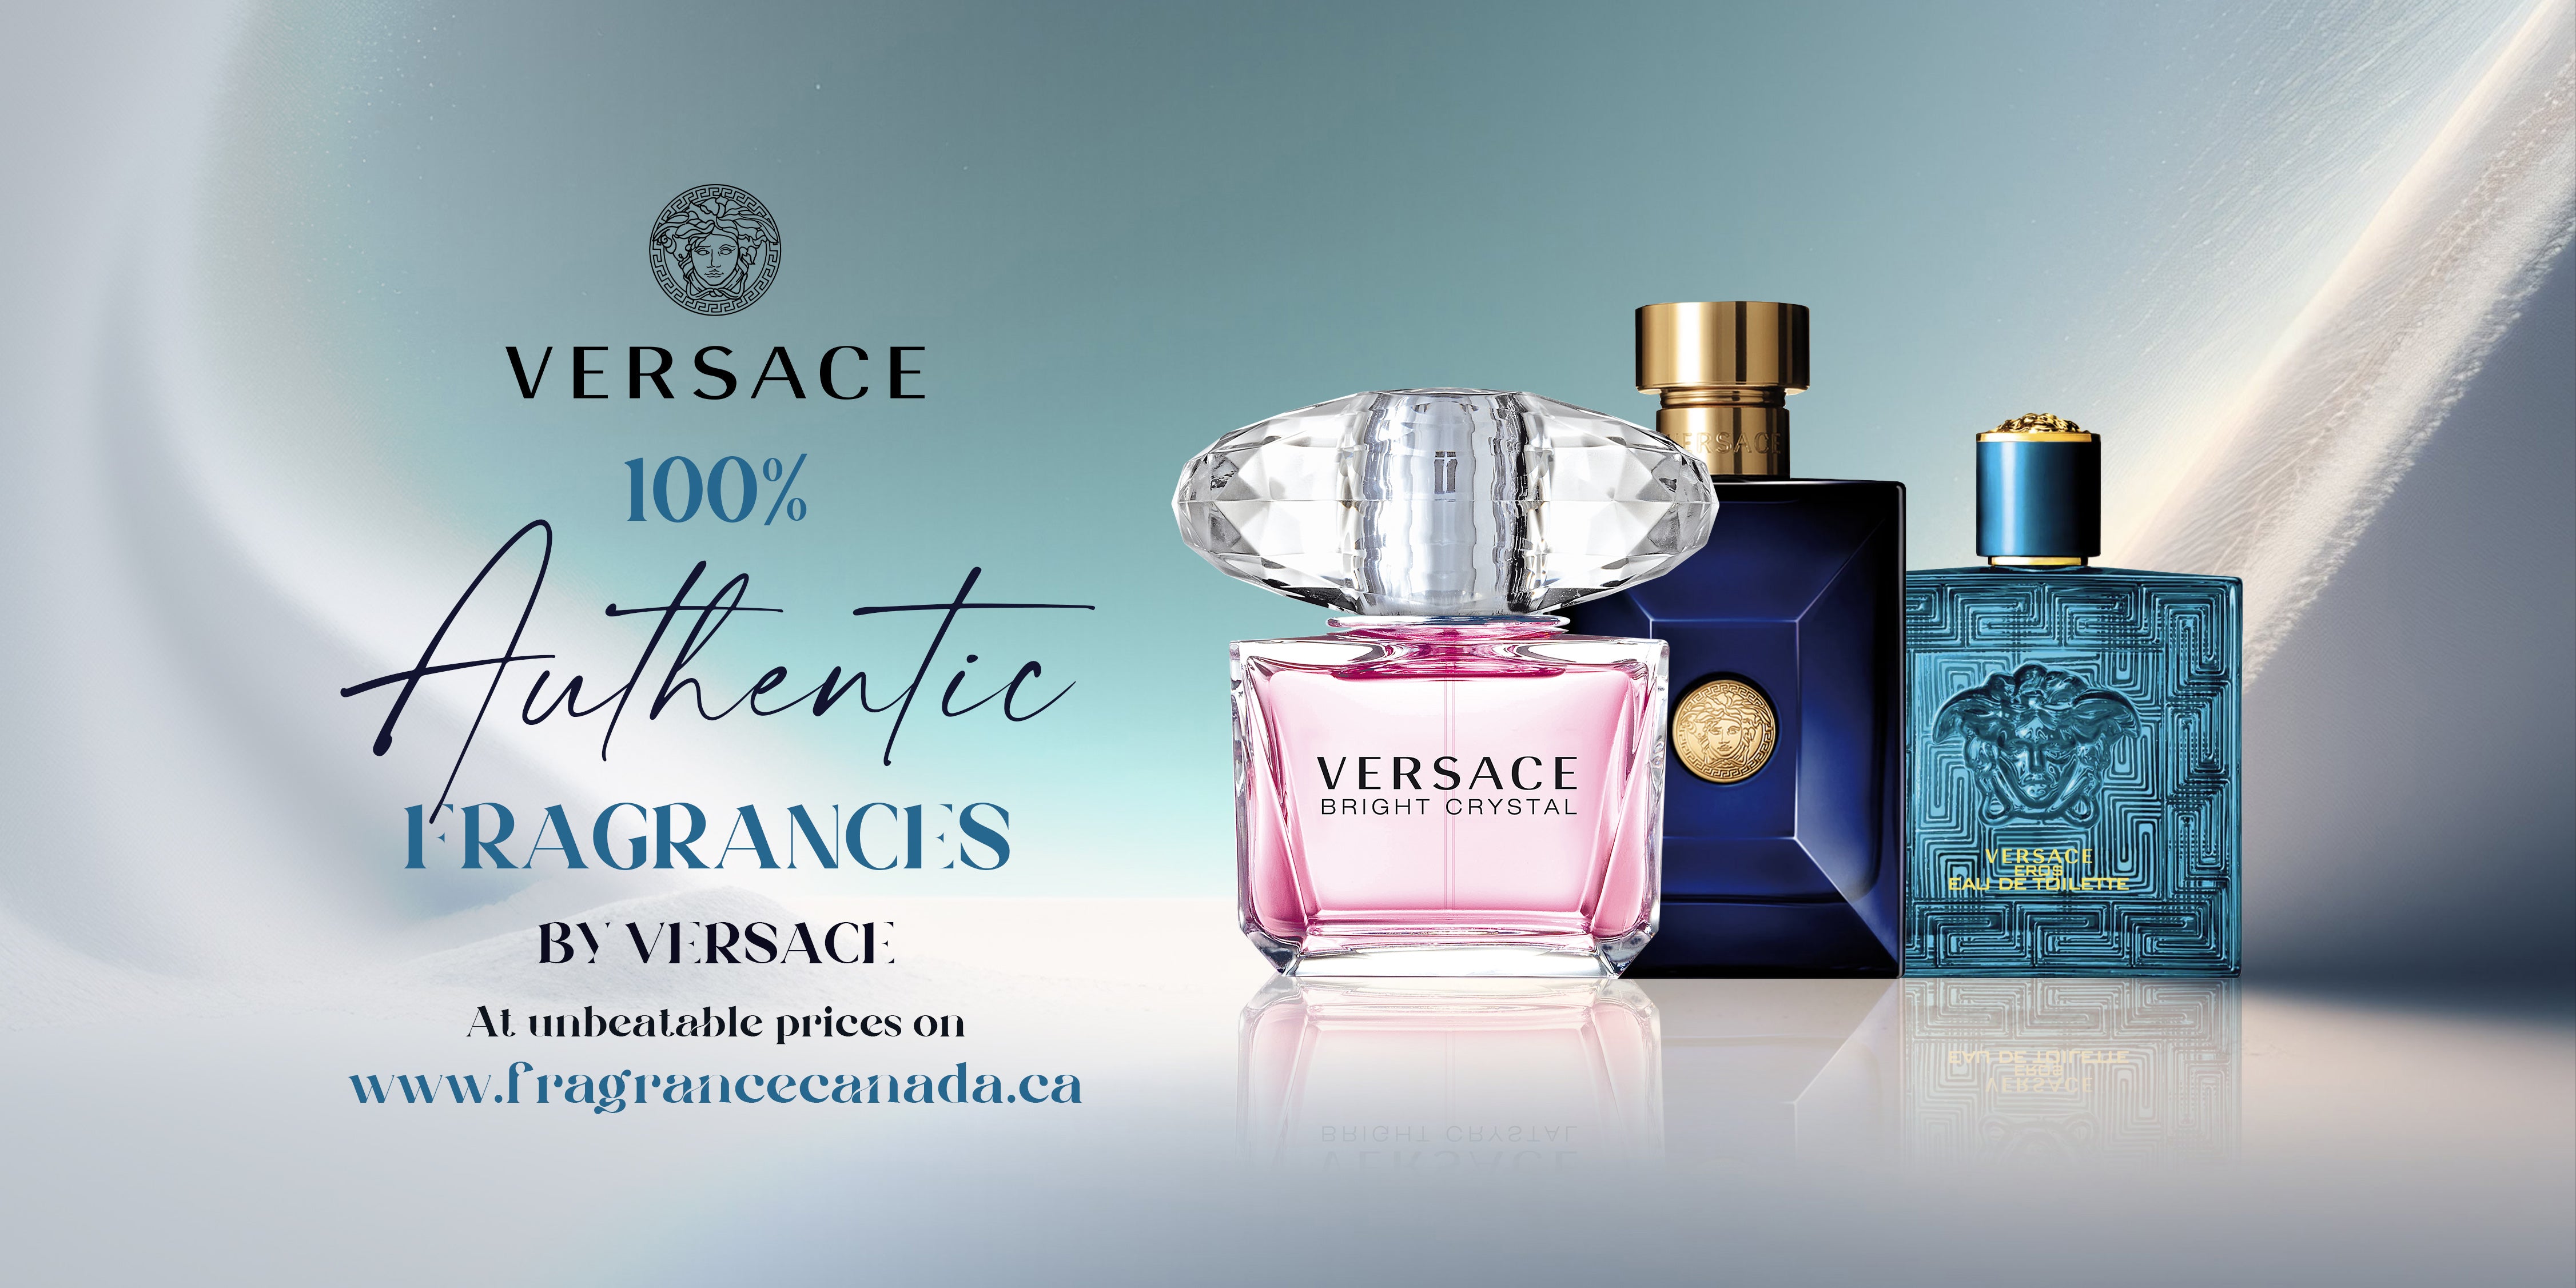 Versace Perfume for Women in Fragrances